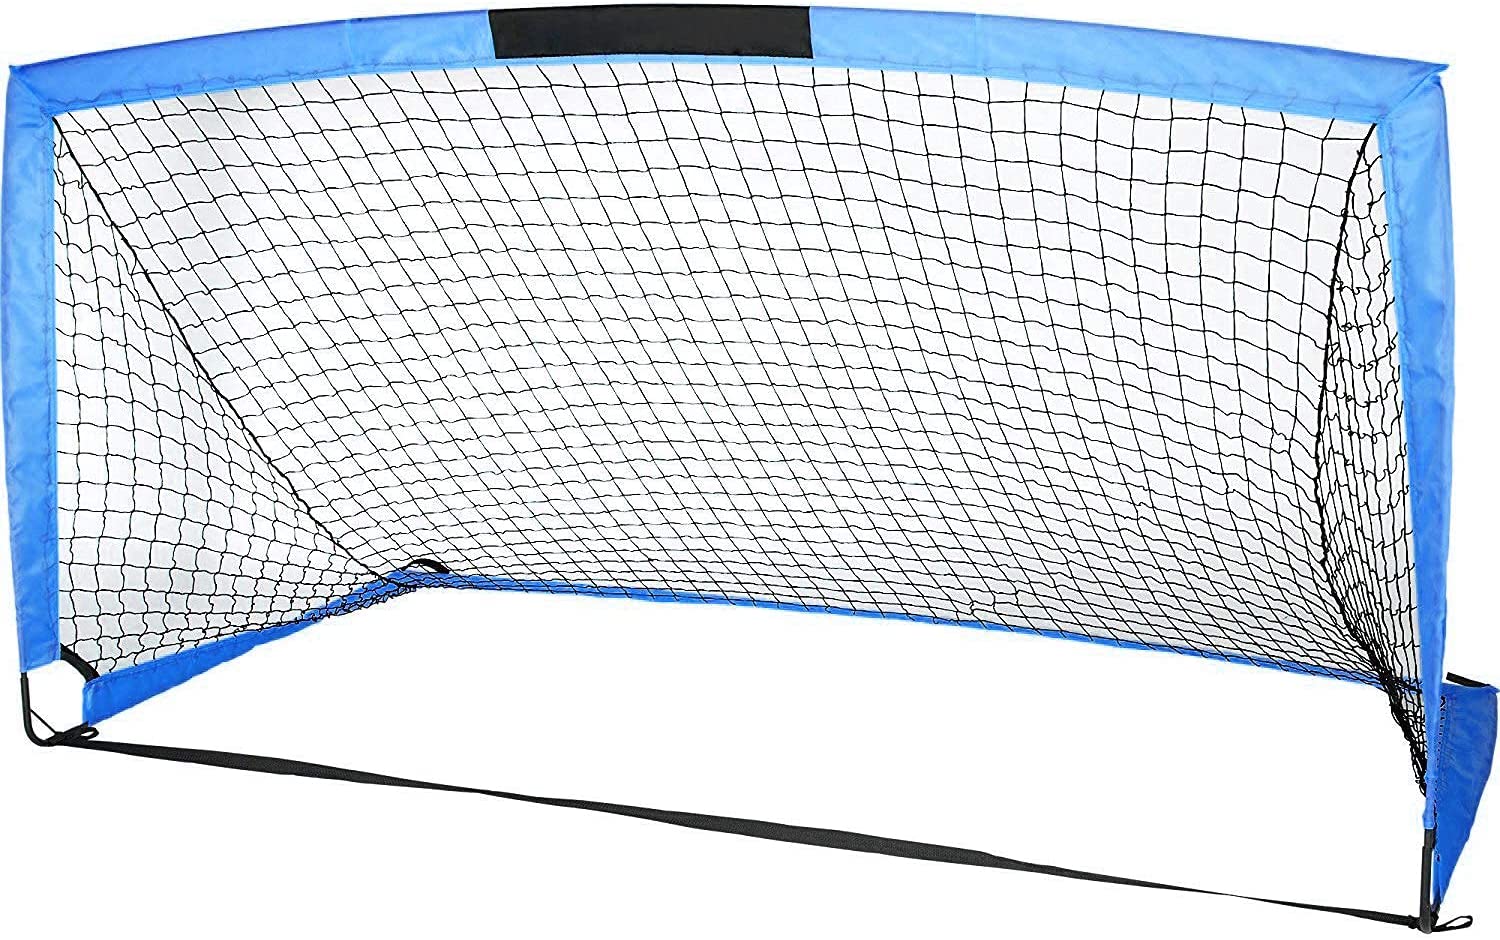 HITIK Soccer Goal 6x4 Portable Soccer Net with Carry Bag for Games and Training for Kids and Teens,Blue - image 1 of 7